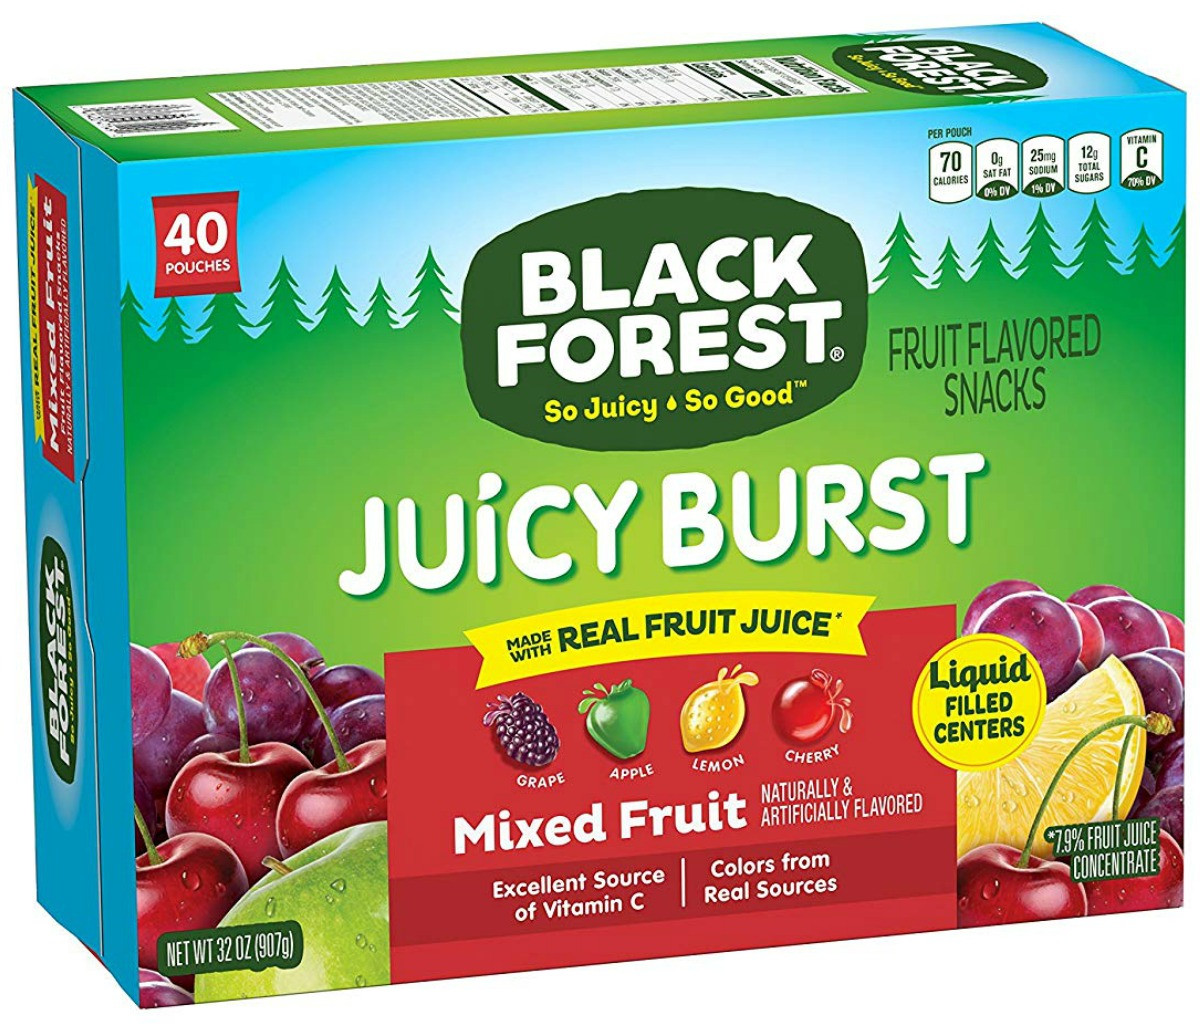 Black Forest Juicy Burst Fruit Snacks 40-Count $5.66 Shipped.